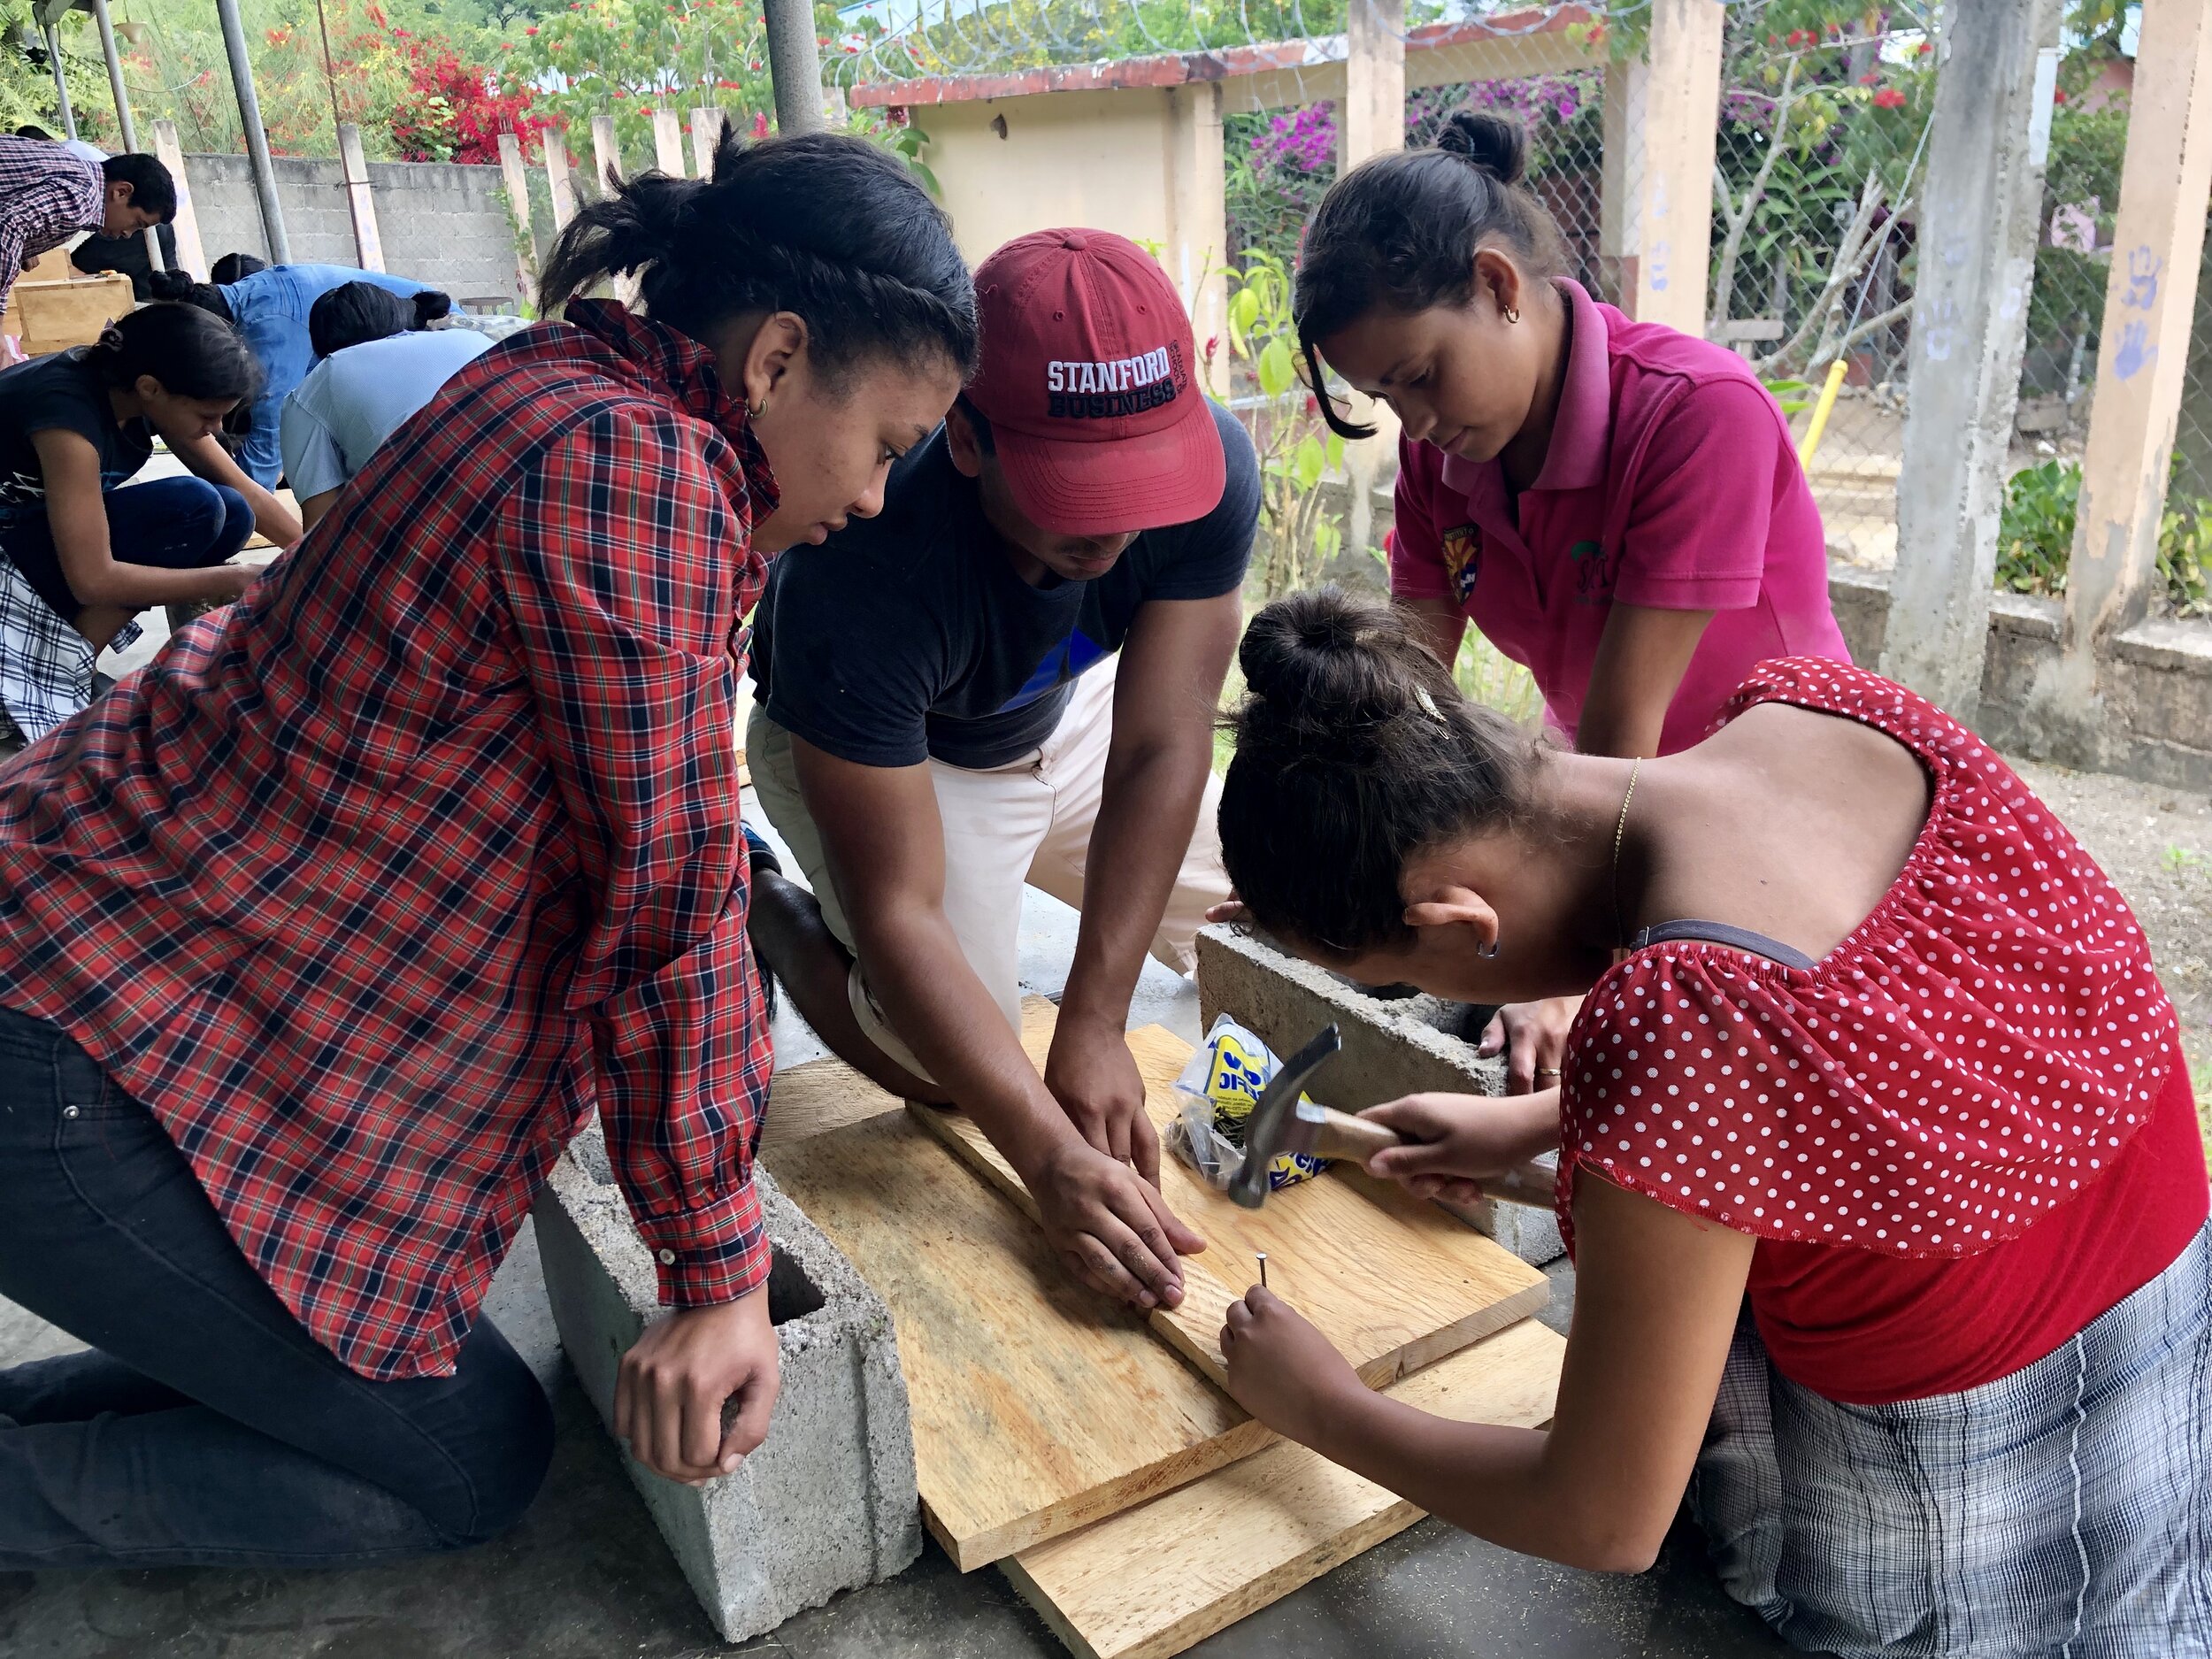 Students learn proper hammering techniques as they assemble a panel for one of the 78 chemical storage safety boxes they constructed.